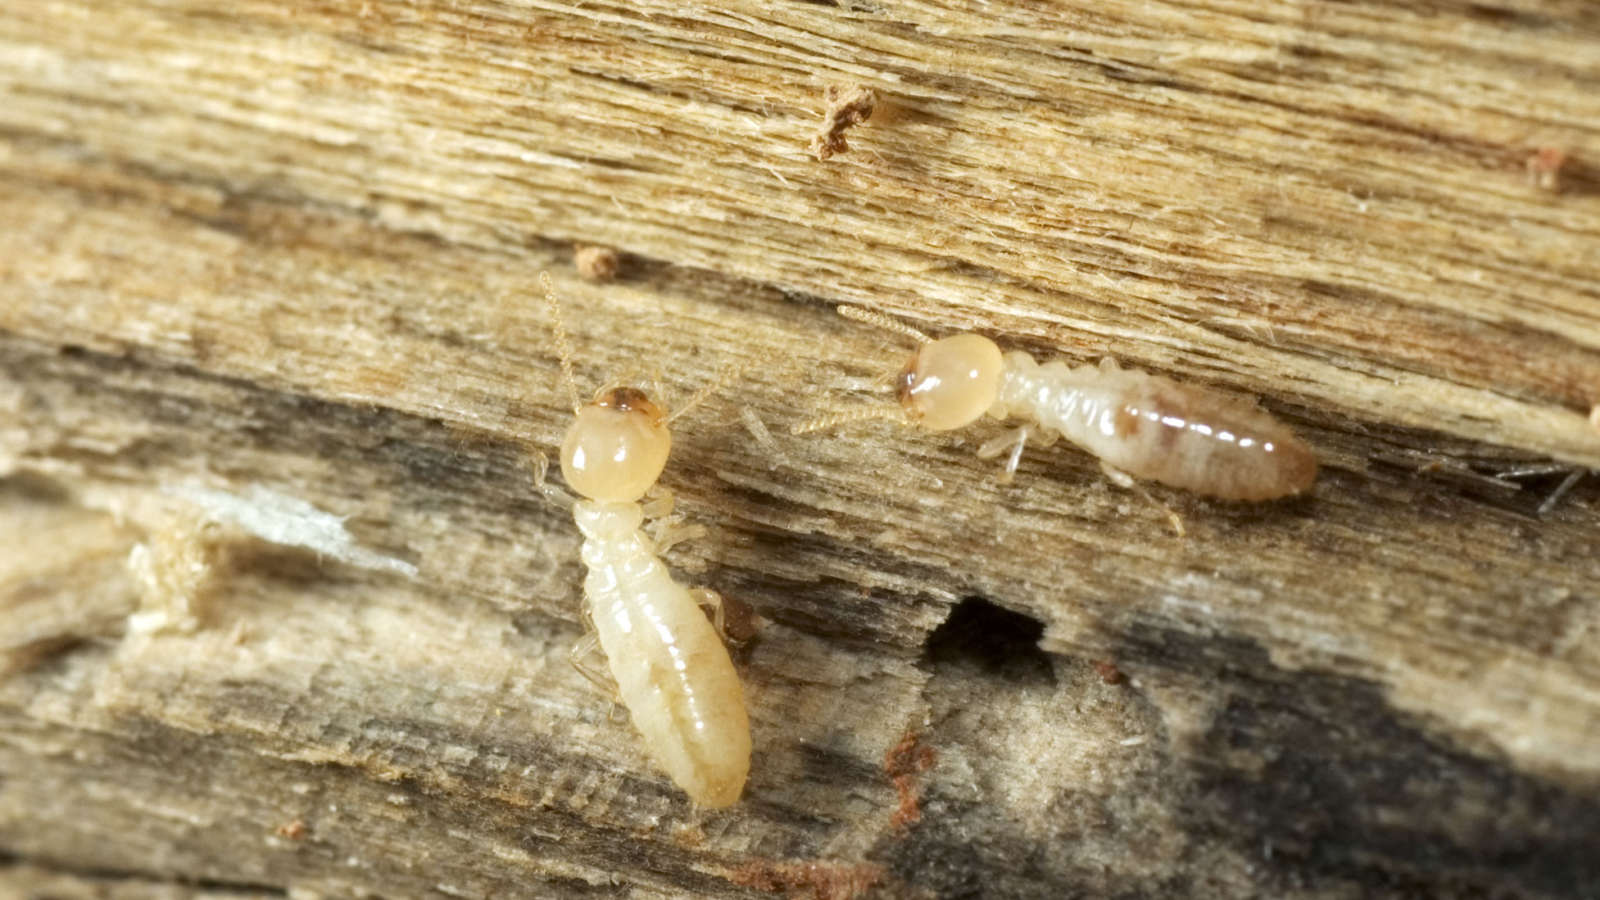 termites eat wood because of what's in their stomach